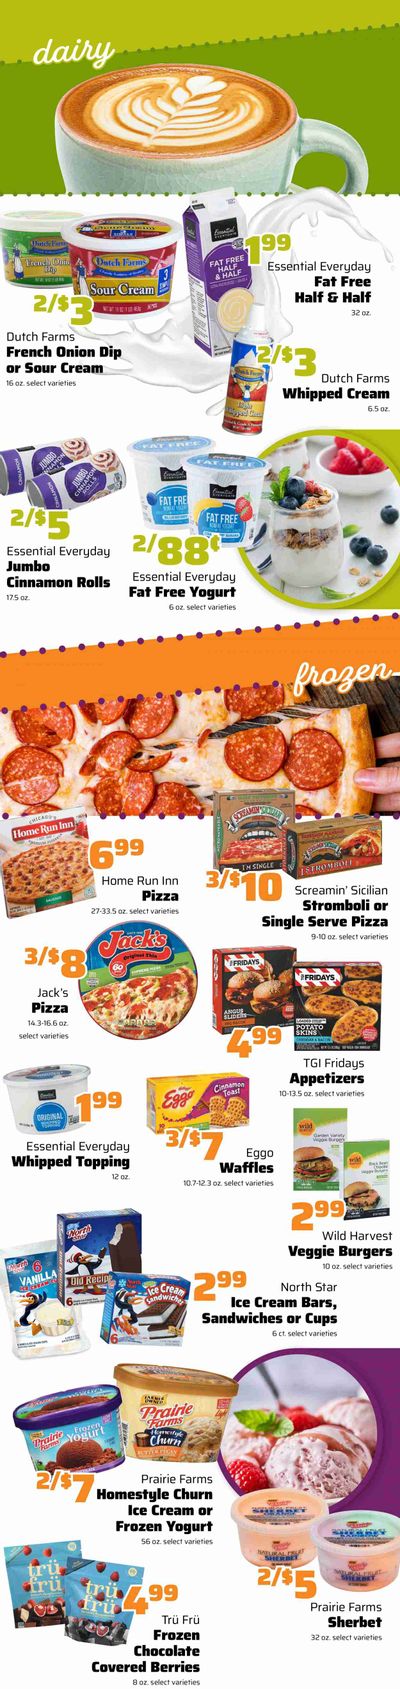 County Market (IL, IN, MO) Weekly Ad Flyer May 5 to May 11